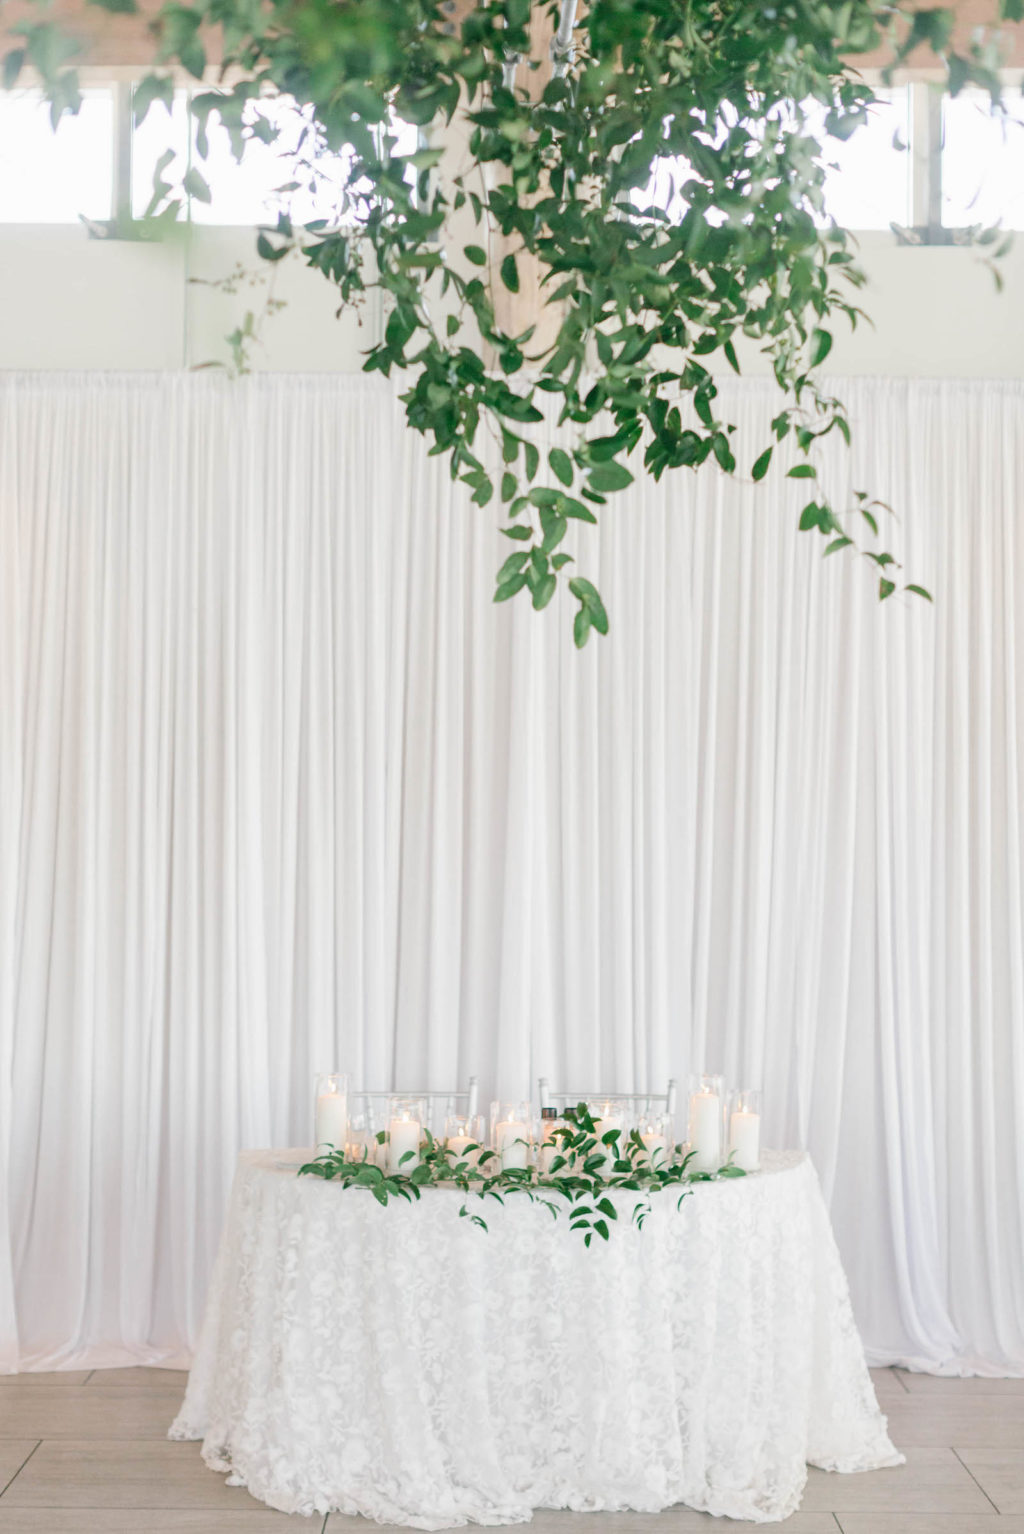 Elegant Romantic Wedding Reception Decor, Sweetheart Table with Delicate White Lace Linens, Greenery and Candles, Linen Drapery Backdrop, Greenery Chandelier | Tampa Wedding Florist Bruce Wayne Florals | Wedding Planner Parties A'la Carte | Wedding Linen Drapery Rental Gabro Event Services